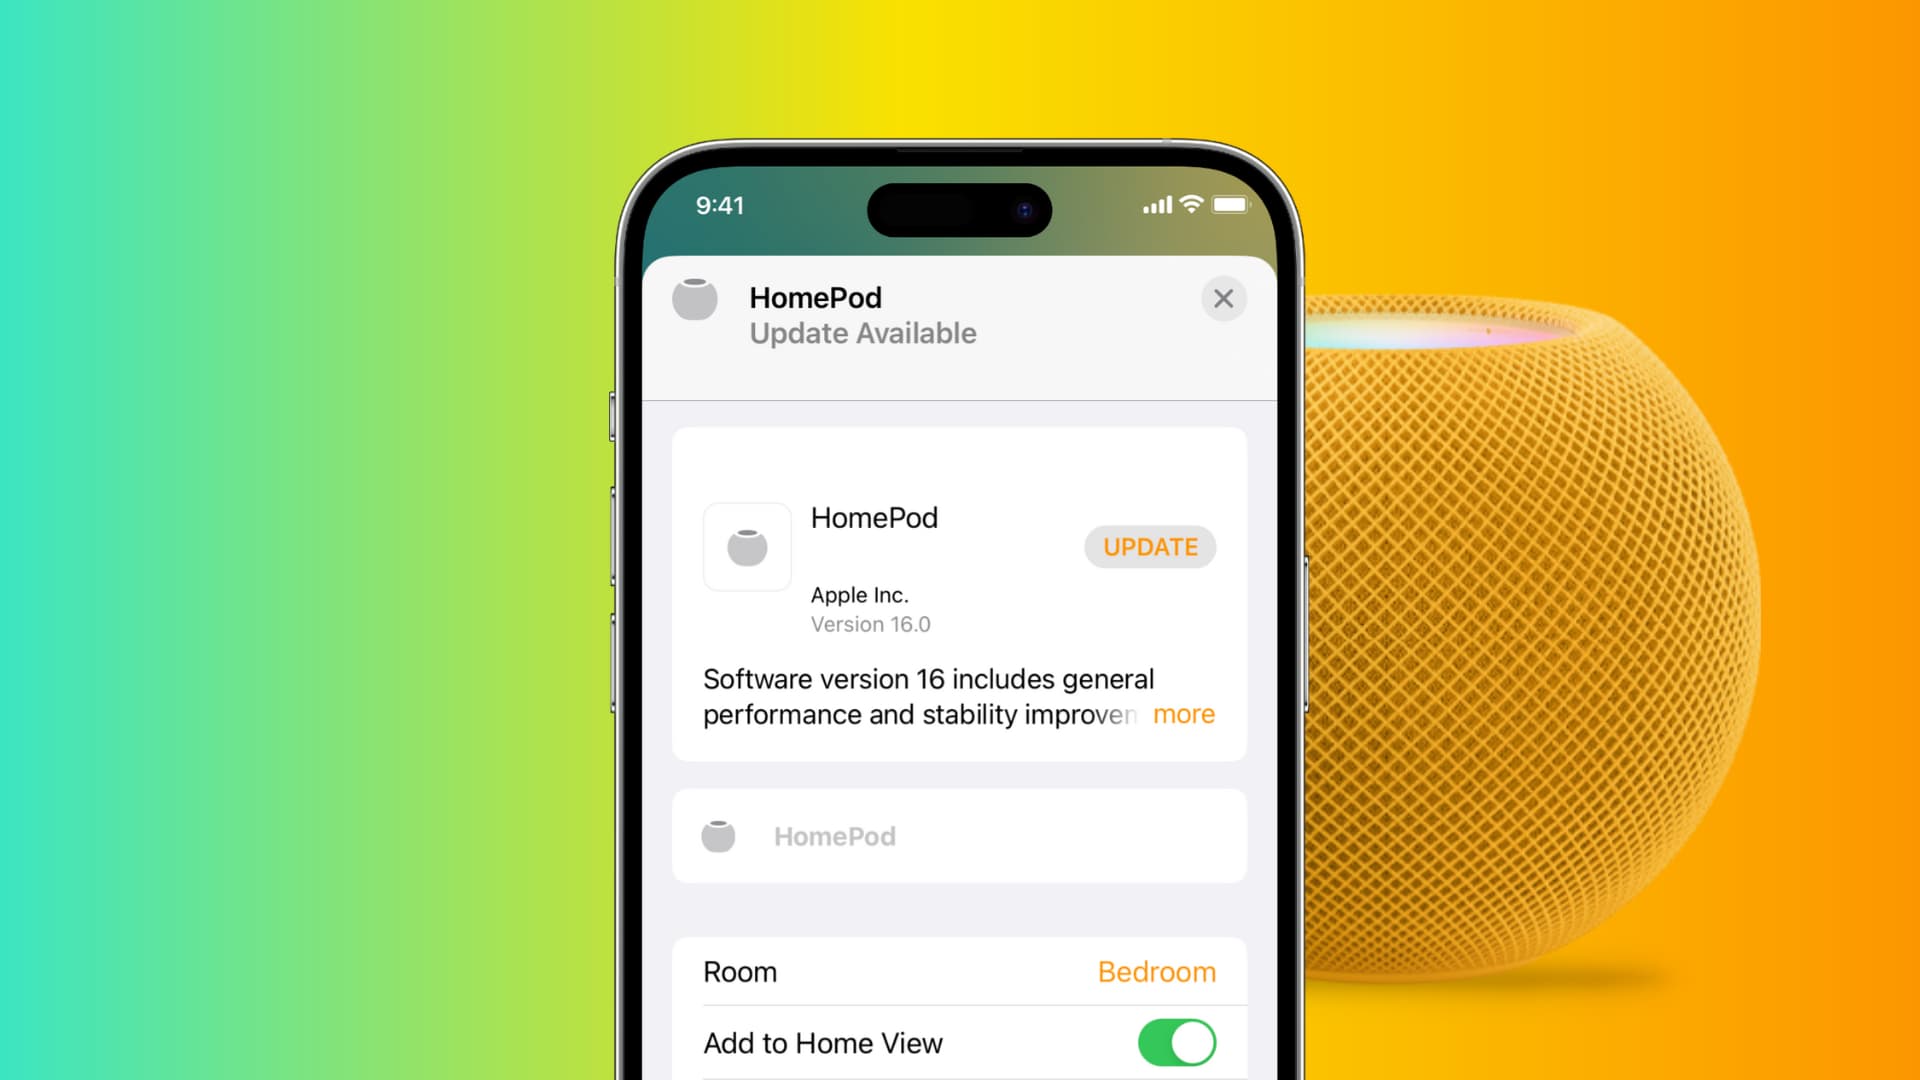 iPhone with HomePod software update screen showing a pending update. Plus, there is a yellow HomePod mini in the background